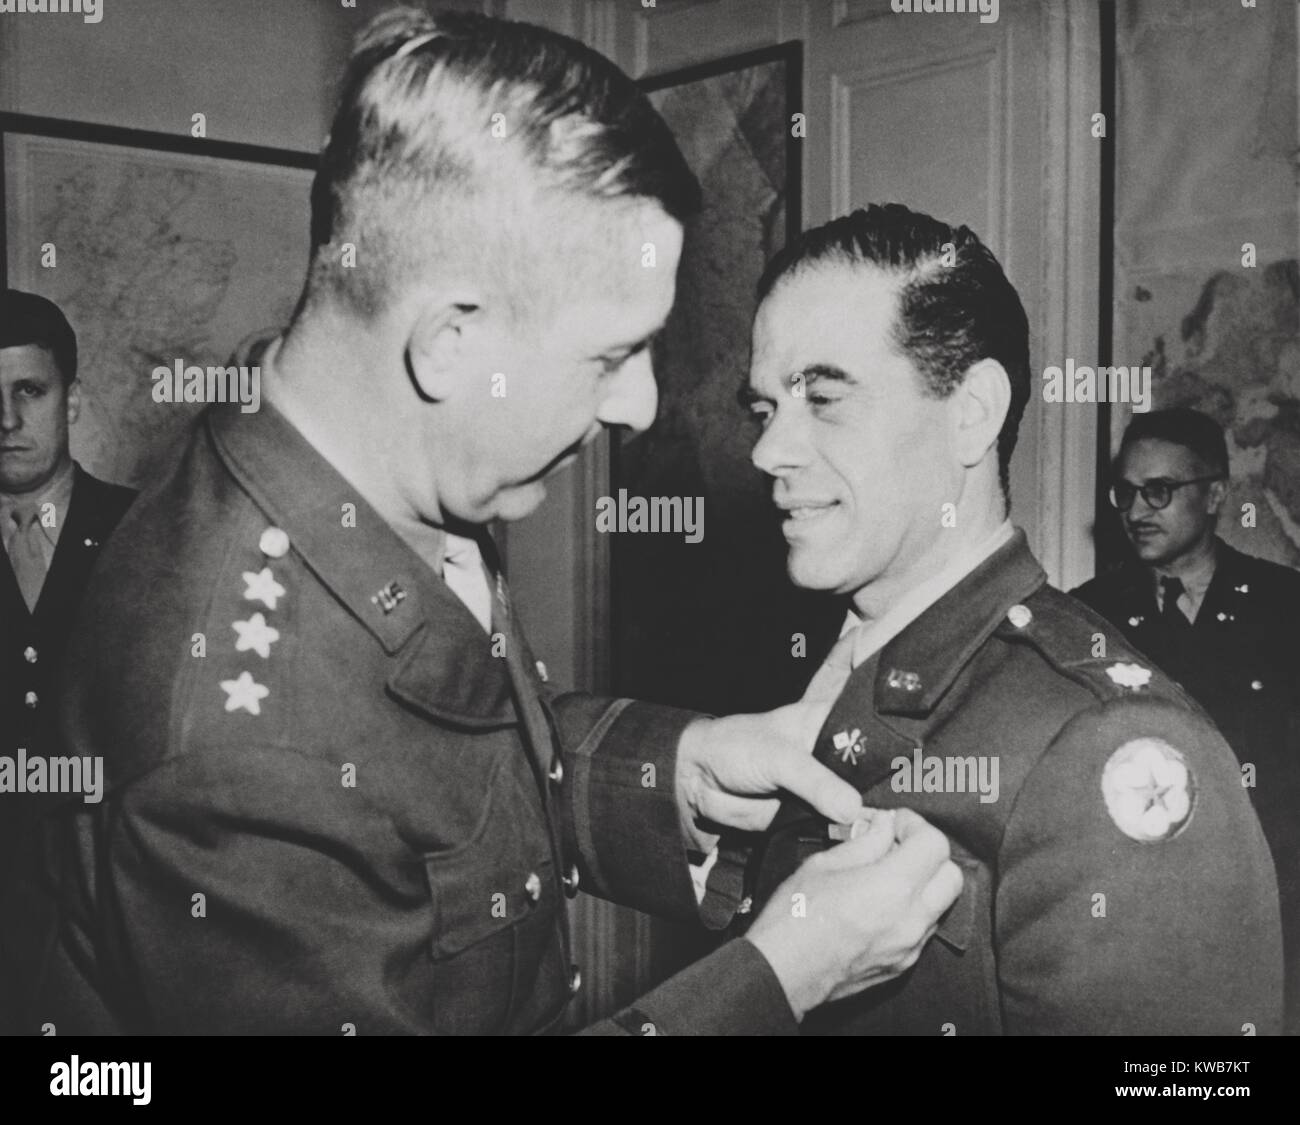 Lt. Col. Frank Capra, receives the Legion of Merit. The Hollywood movie director was chief of the U.S. Army Signal Corps motion picture production unit. He produced, 'Why We Fight', a series of pictures on events leading up to our entry into war, for use in Army orientation courses. Nov. 29, 1943. World War 2. (BSLOC 2014 10 238) Stock Photo